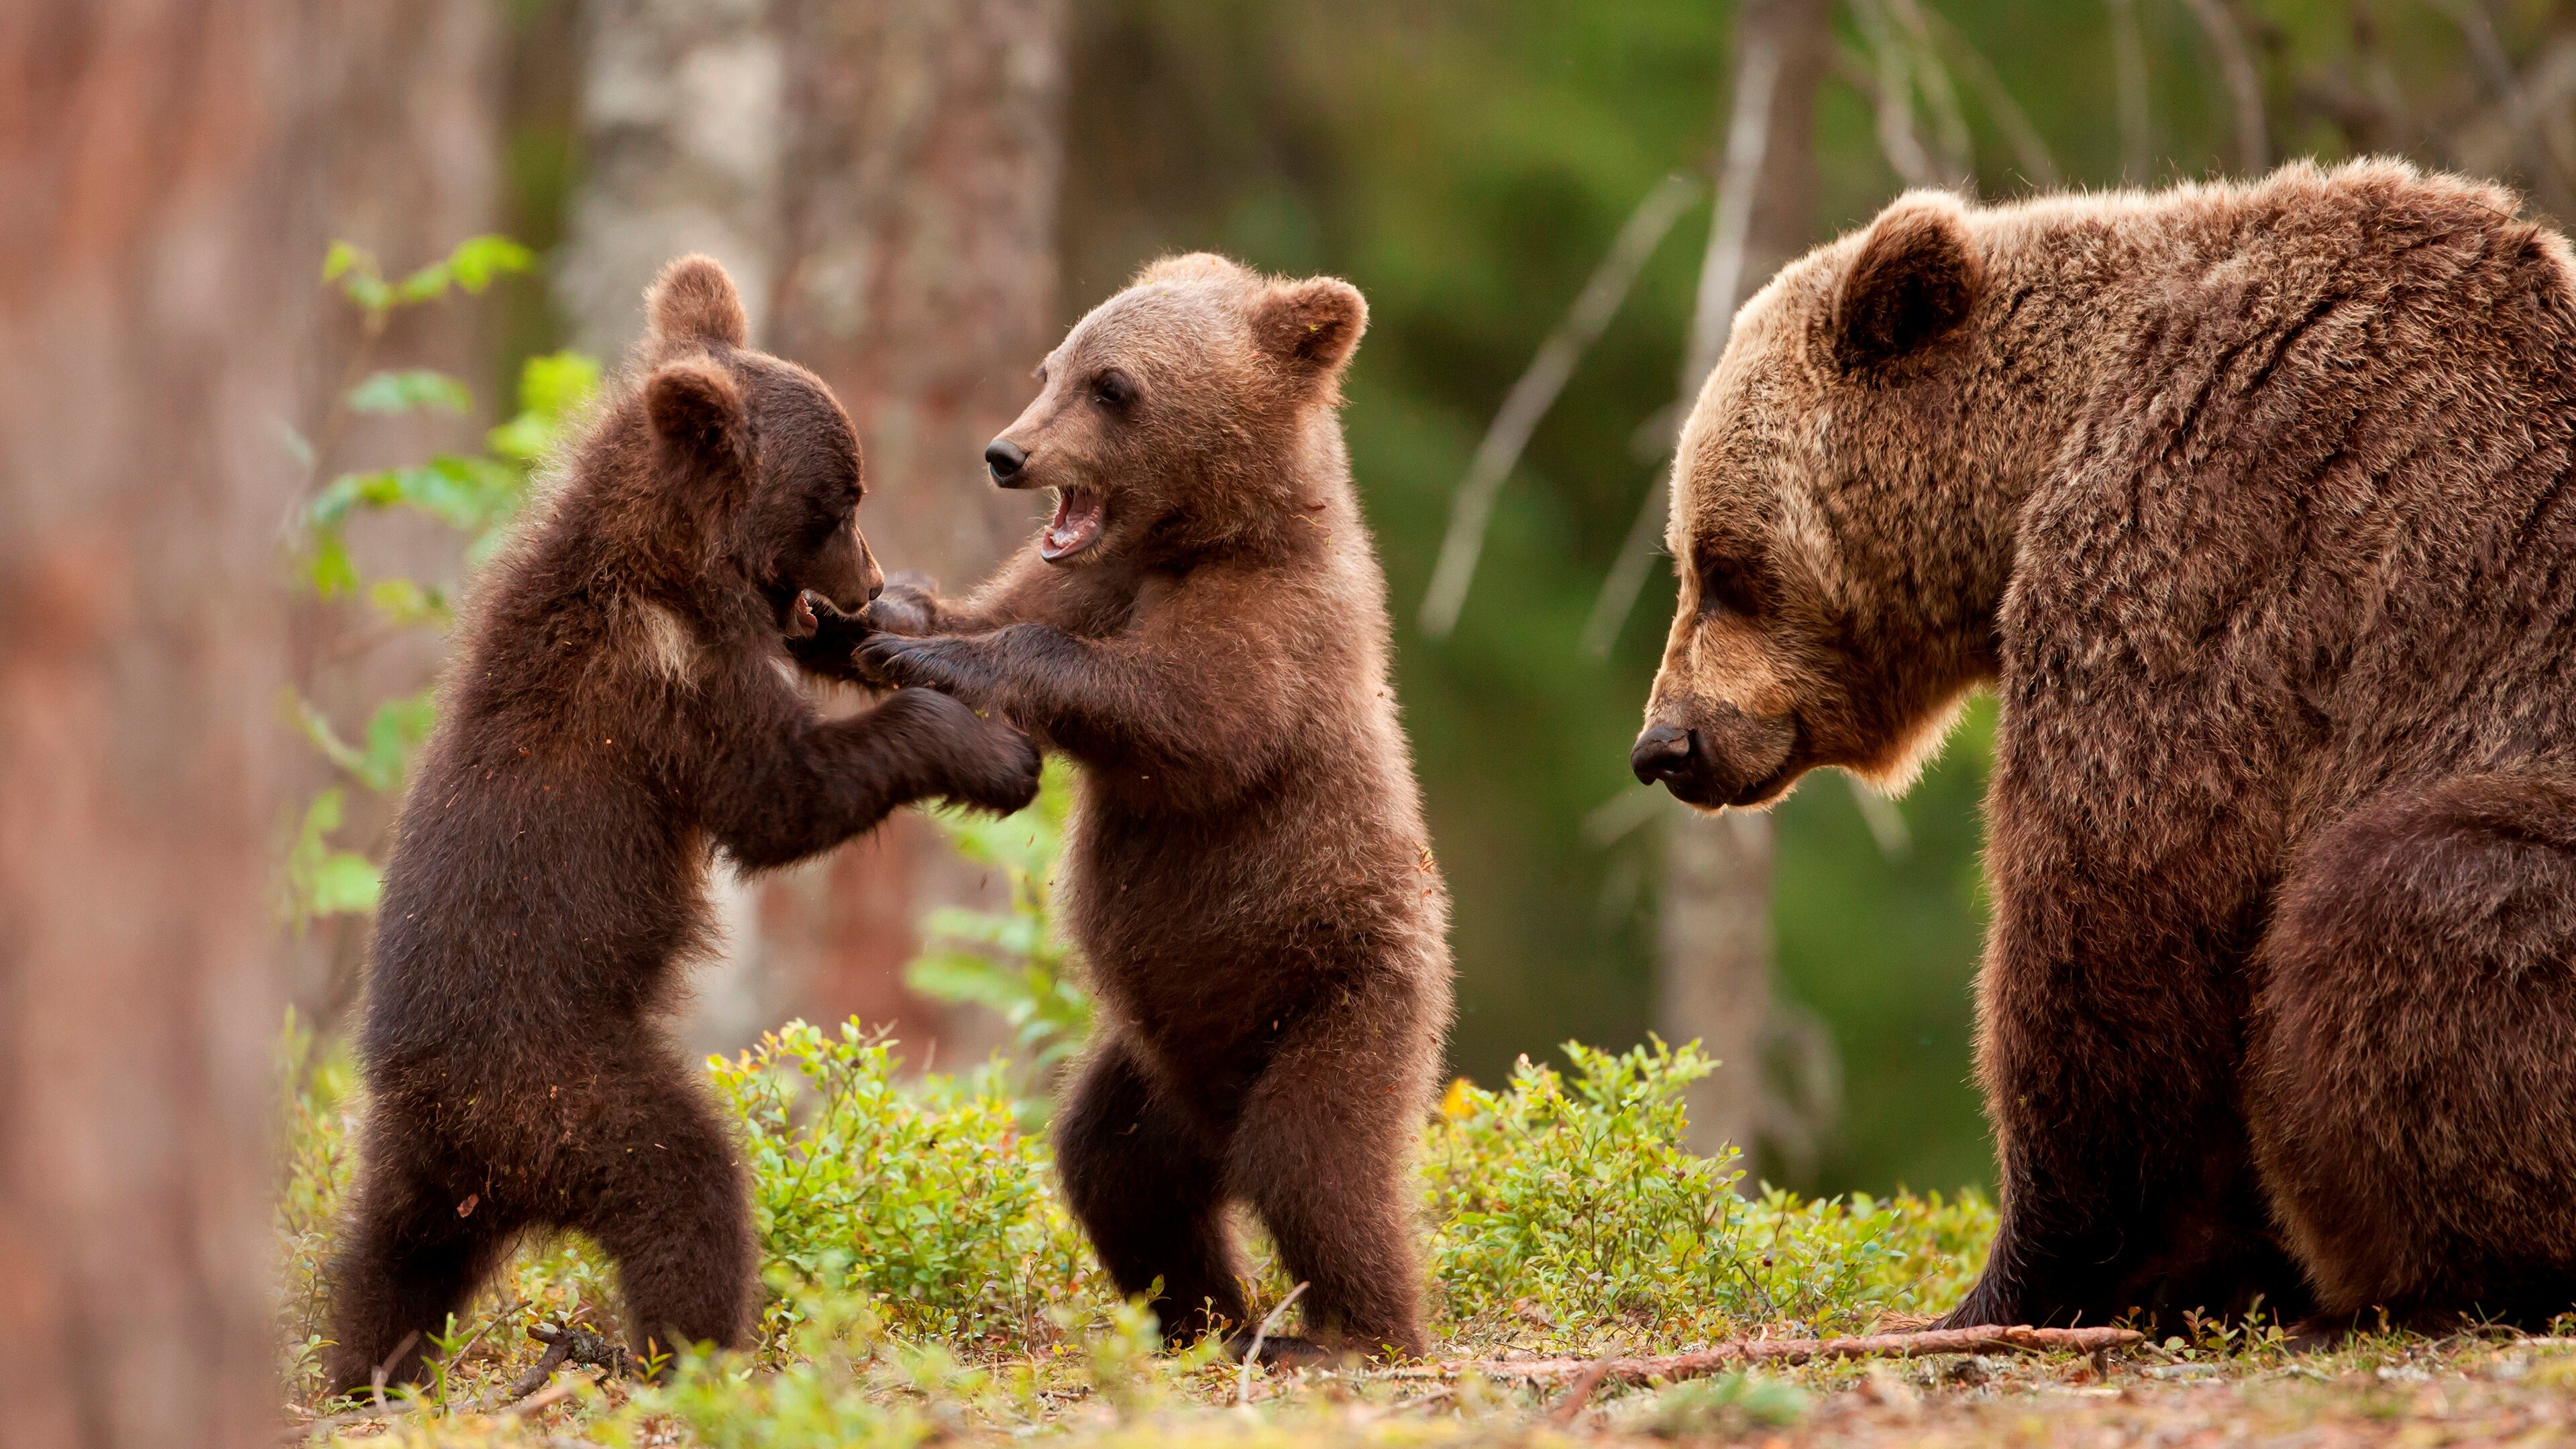 Bear: Mammals, Distinctive by their fur-based bodies and strong claws, Cubs. 3840x2160 4K Wallpaper.